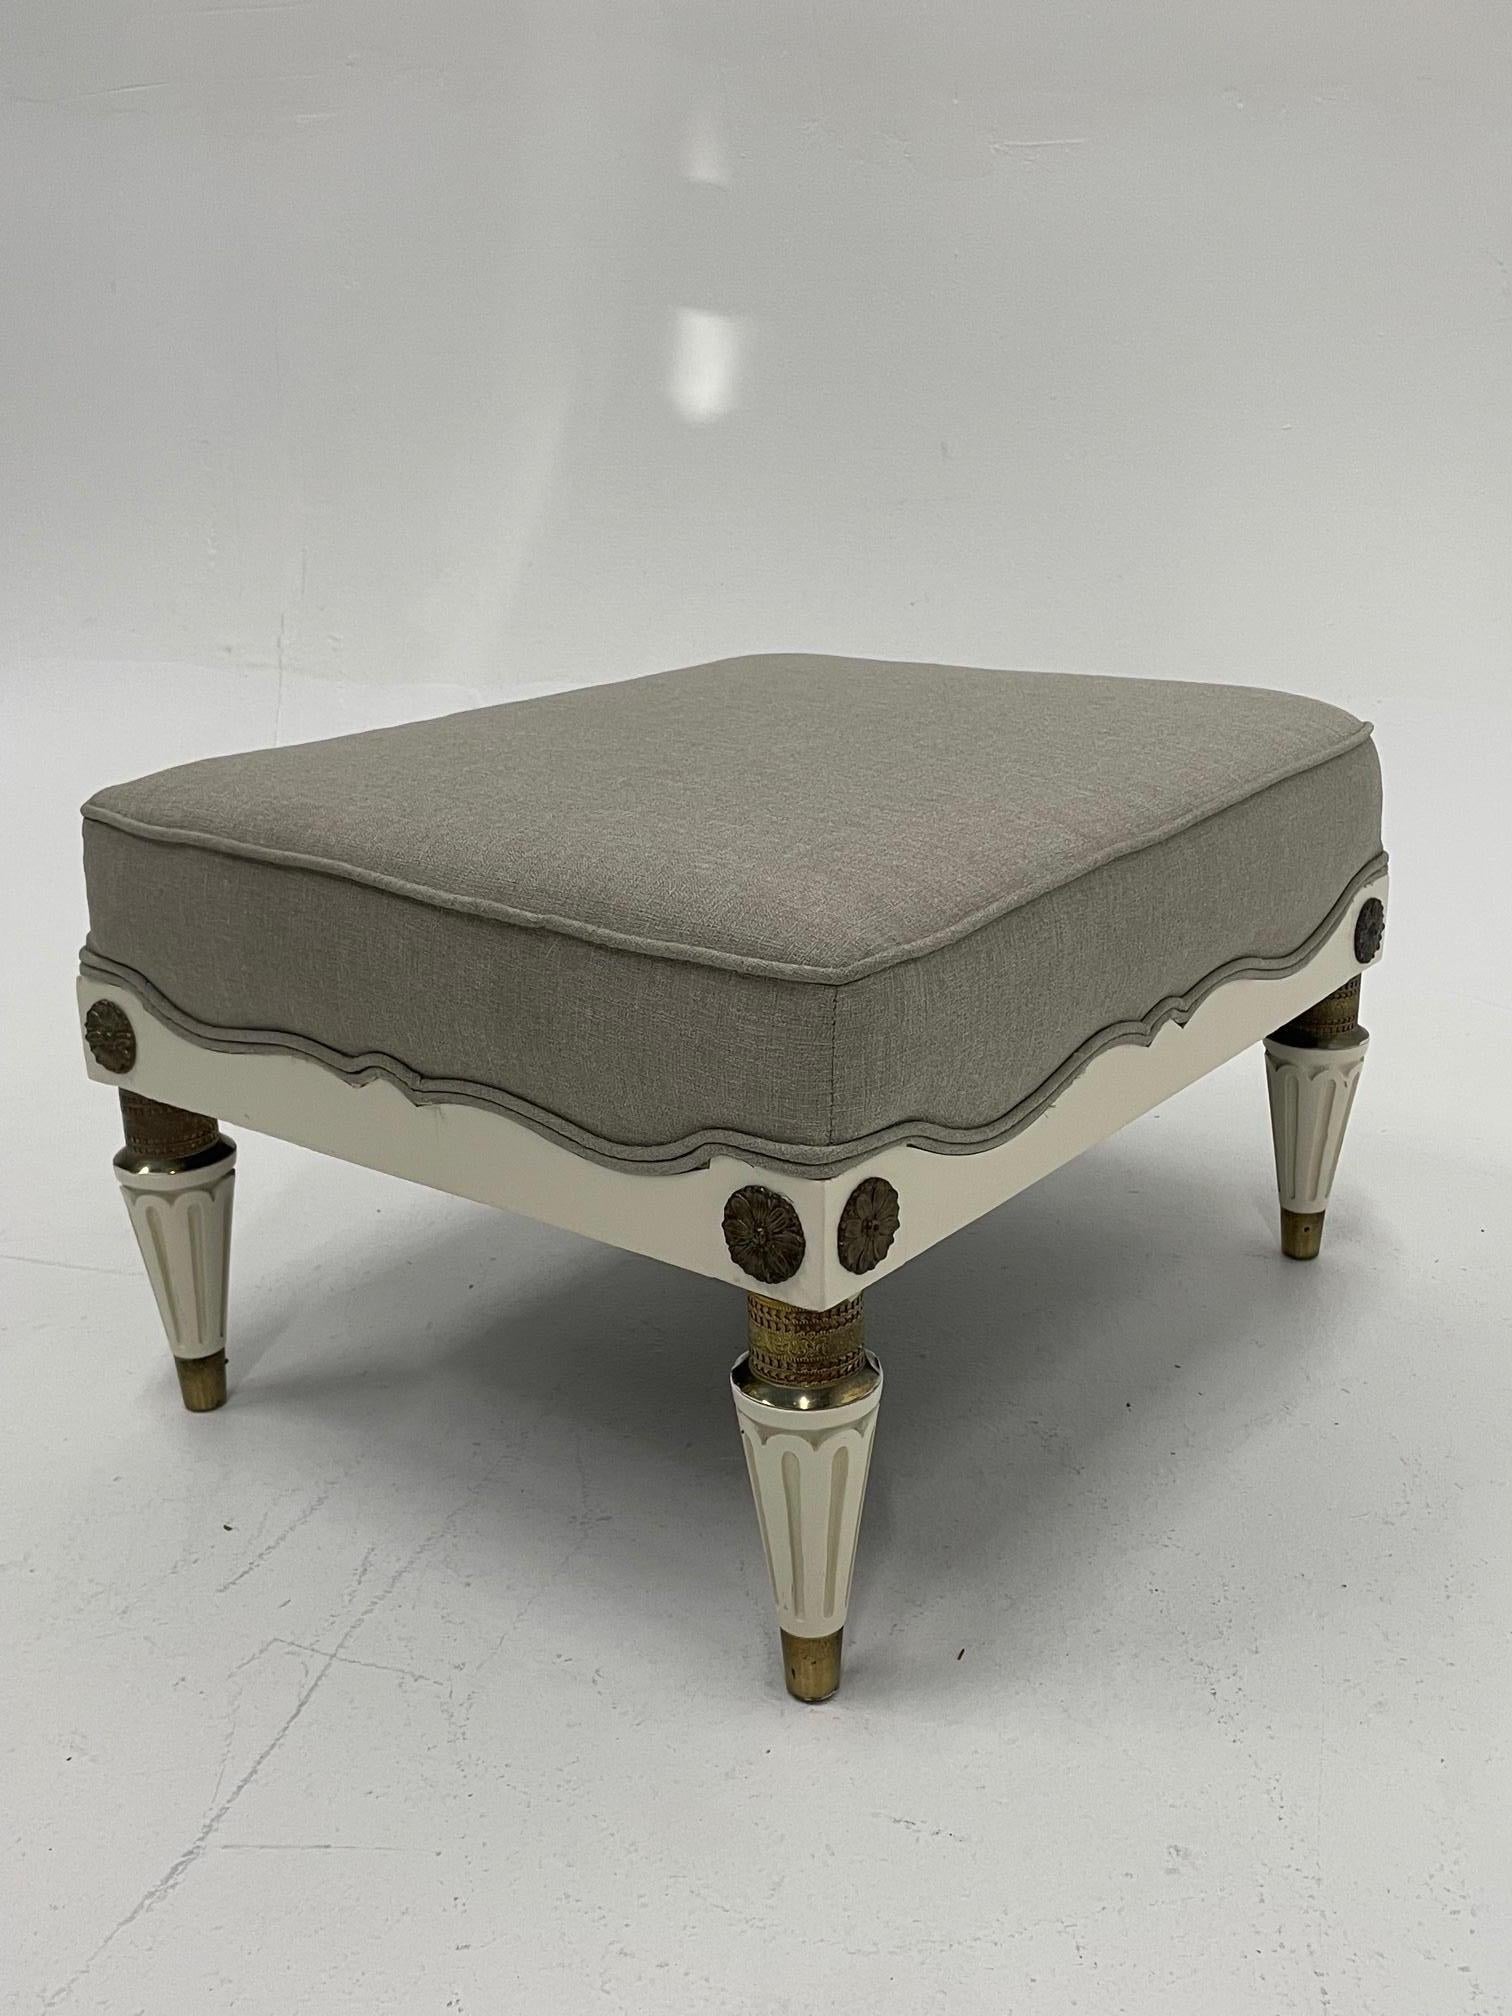 A very classy and unusually stylish French ottoman having unusual blend of white laquered wood embellished by brass mounts, decoration on the tapered fluted legs and capped feet. Newly upholstered in high end linen and pretty scalloped lines at the